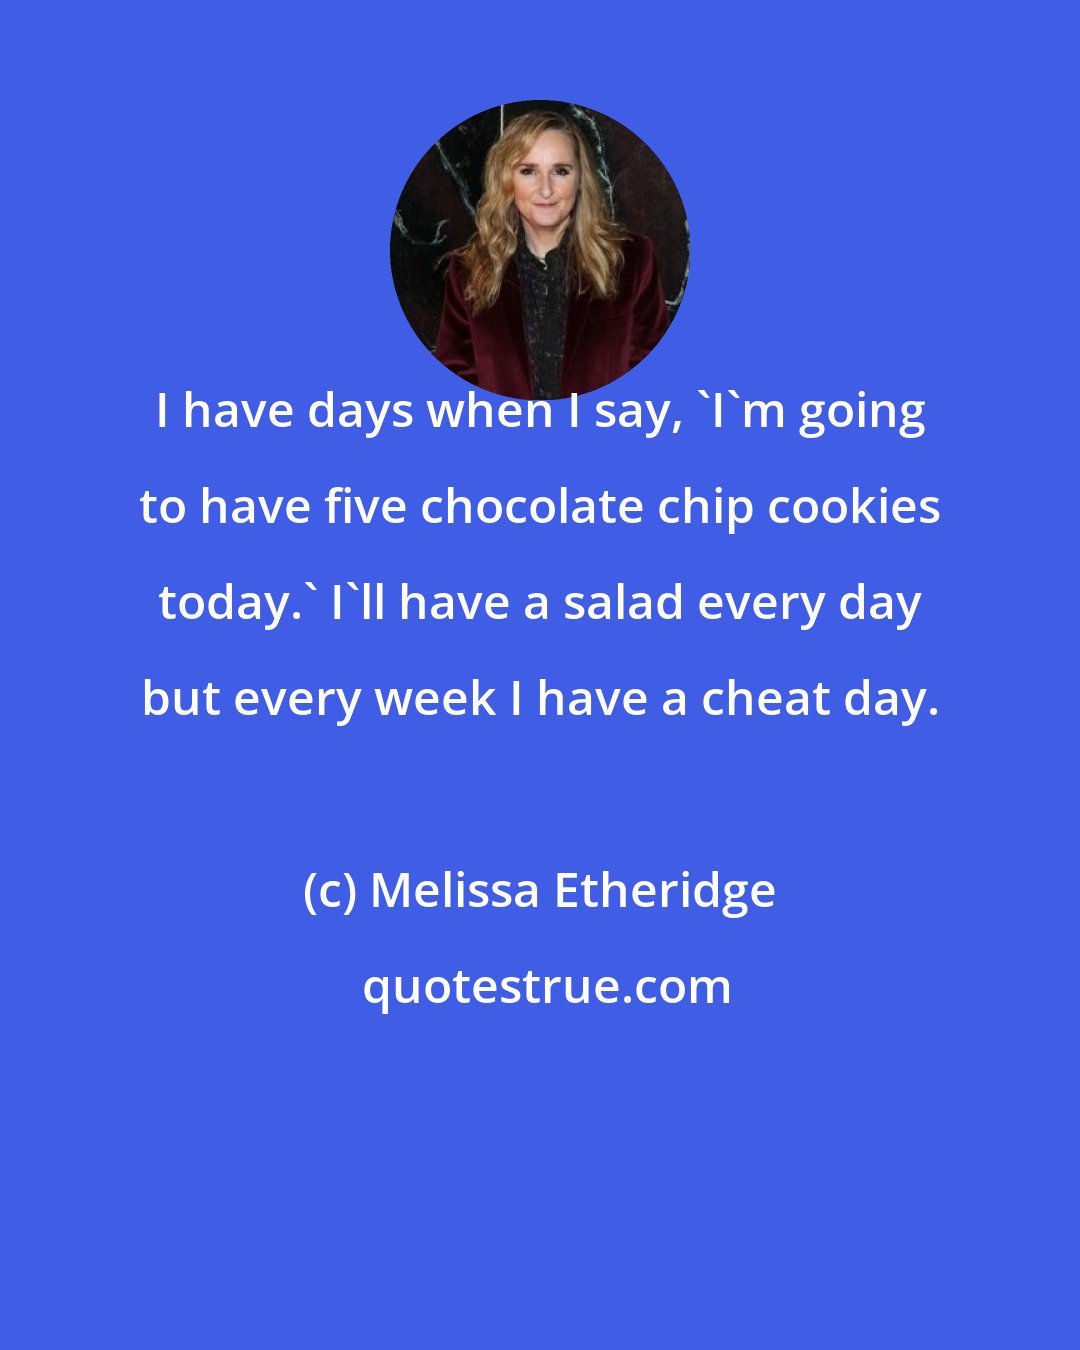 Melissa Etheridge: I have days when I say, 'I'm going to have five chocolate chip cookies today.' I'll have a salad every day but every week I have a cheat day.